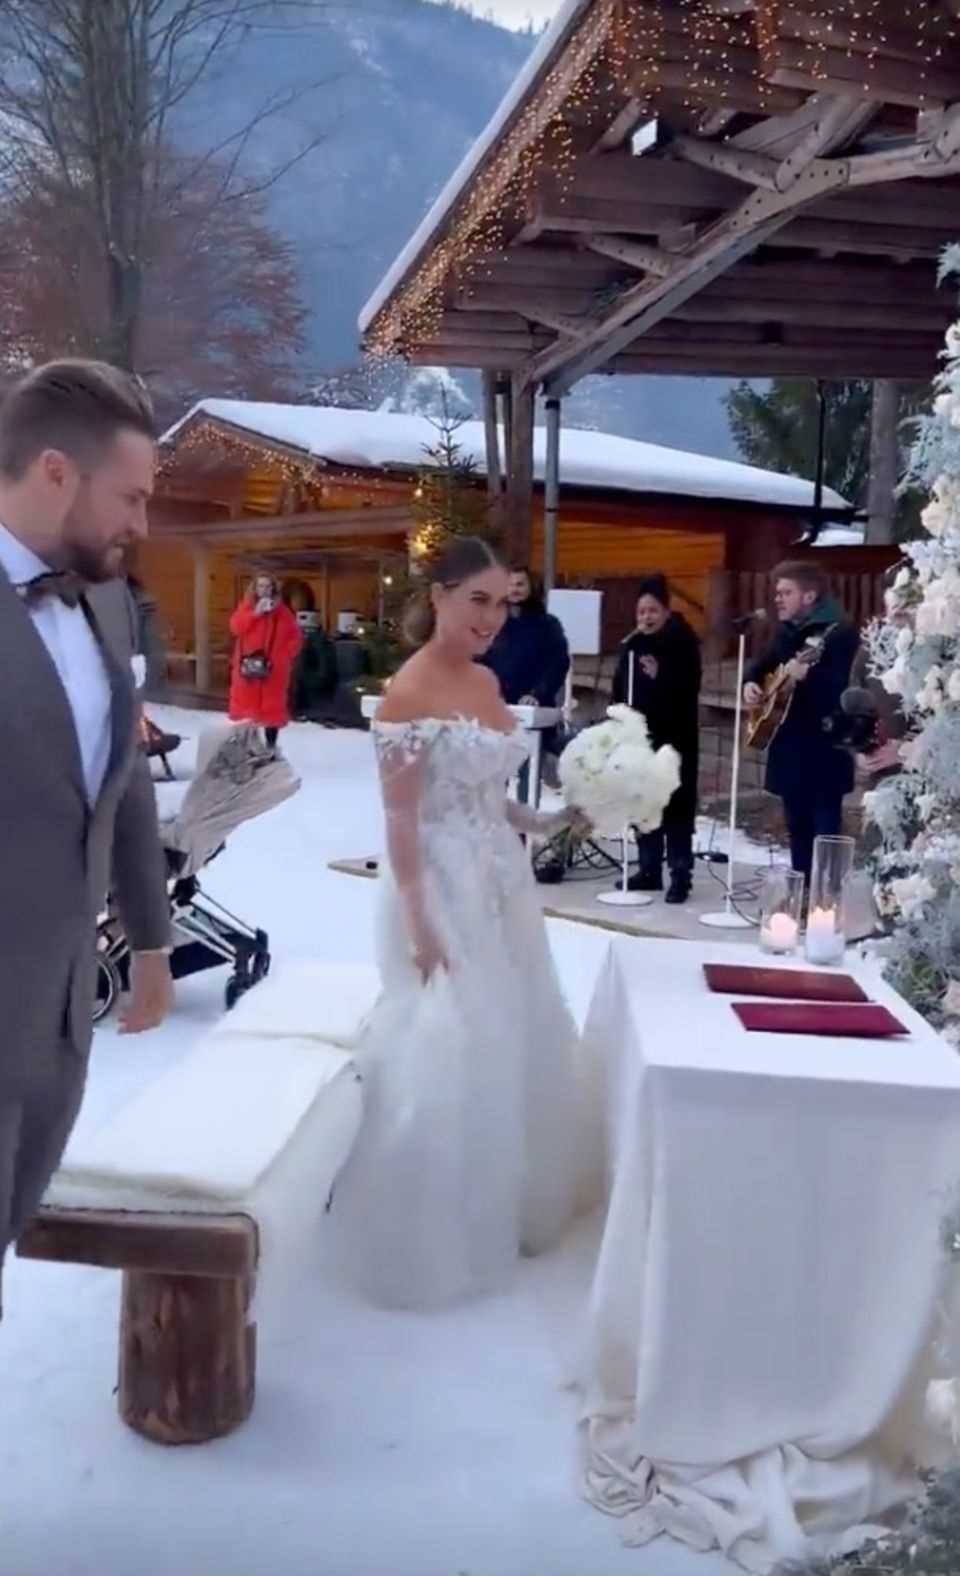 Jessica Paszka looks like an ice queen in her wedding dress. 